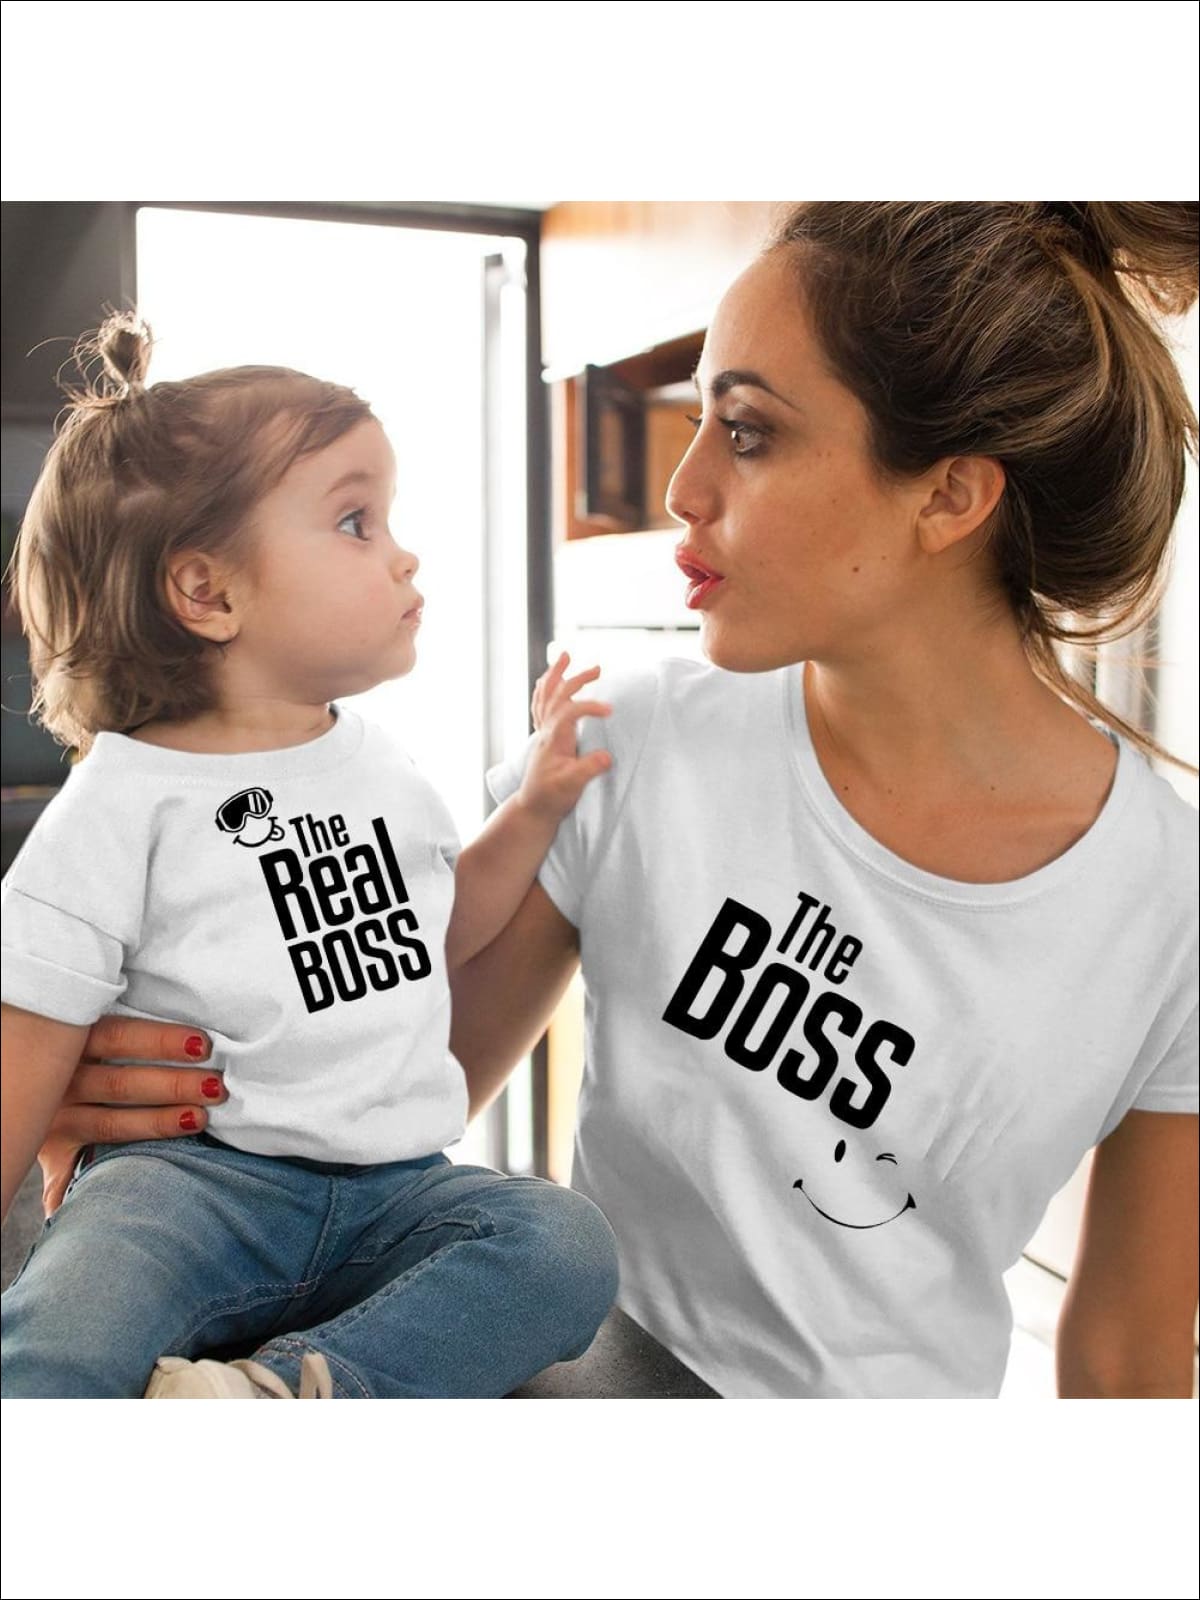 Mommy & Me The Boss & The Real Boss Matching T-shirts - Mommy & Me Top